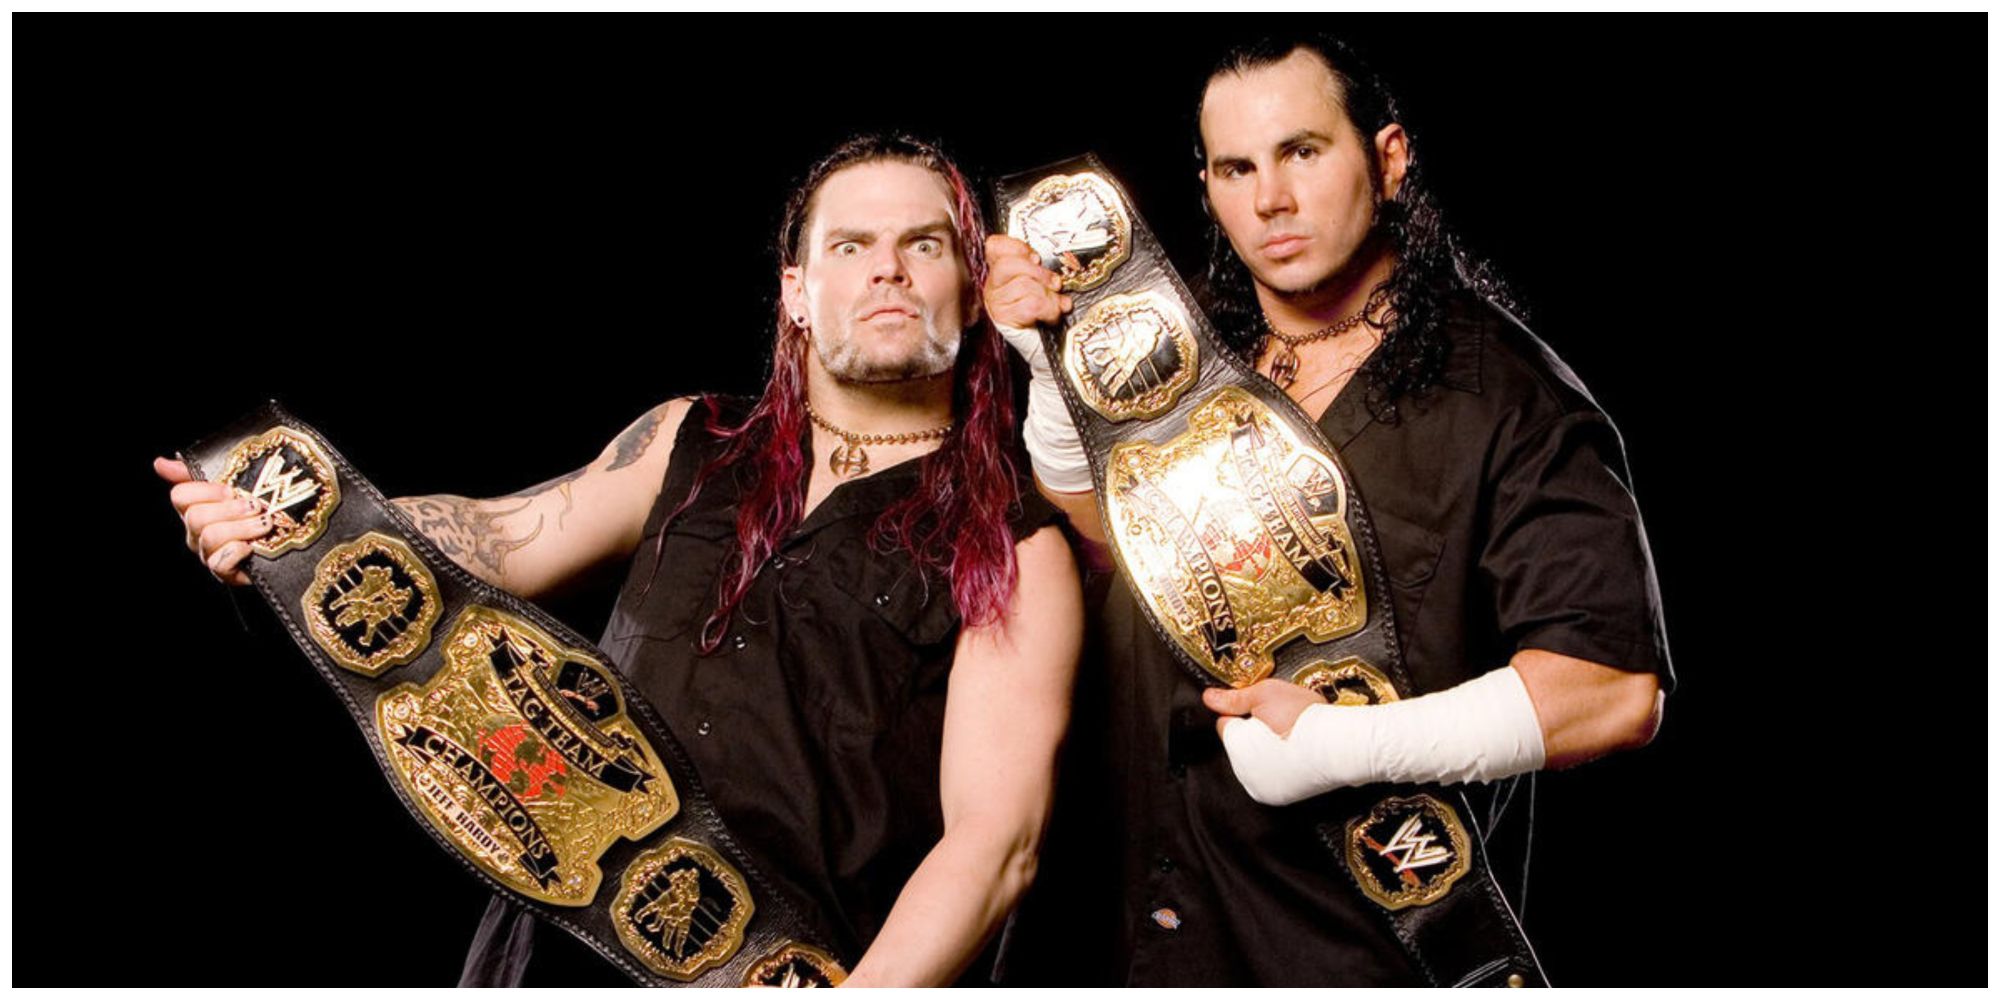 Jeff Hardy and Matt Hardy holding the WWE Tag Team Championships